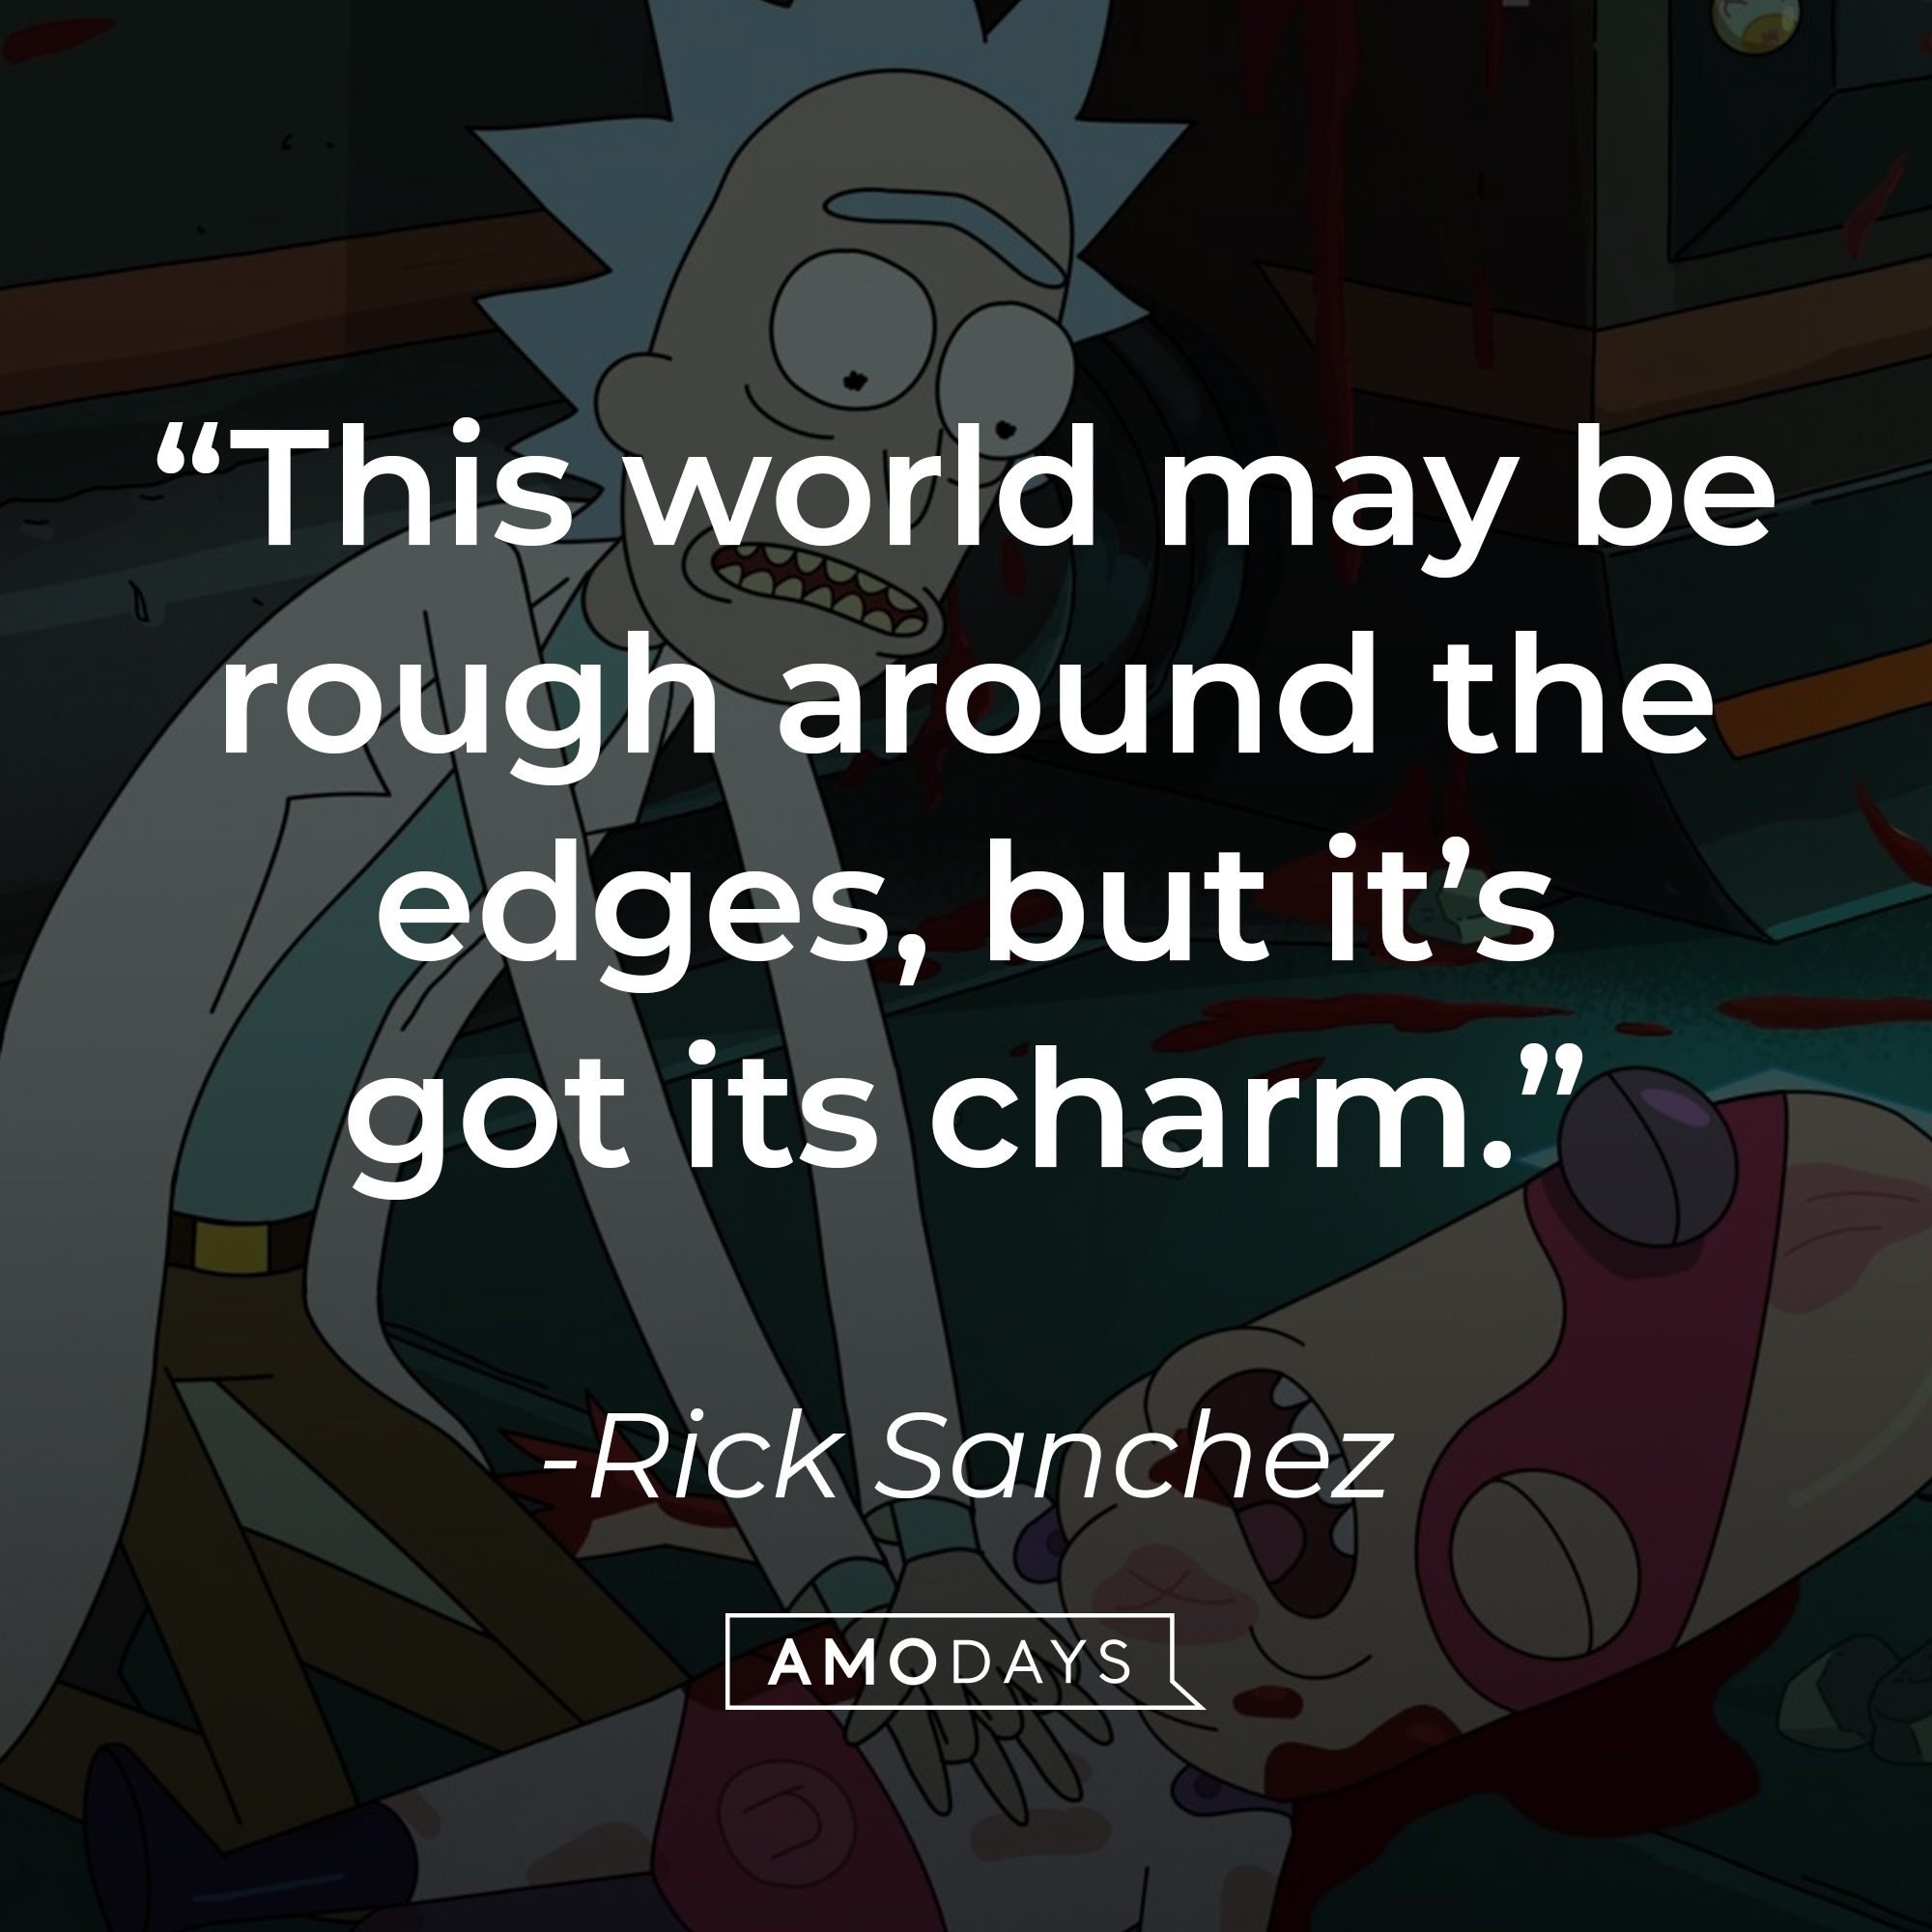 An image of Rick Sanchez trying to save another character, with his quote: "This world may be rough around the edges, but it’s got its charm.” | Source: Facebook.com/RickandMorty